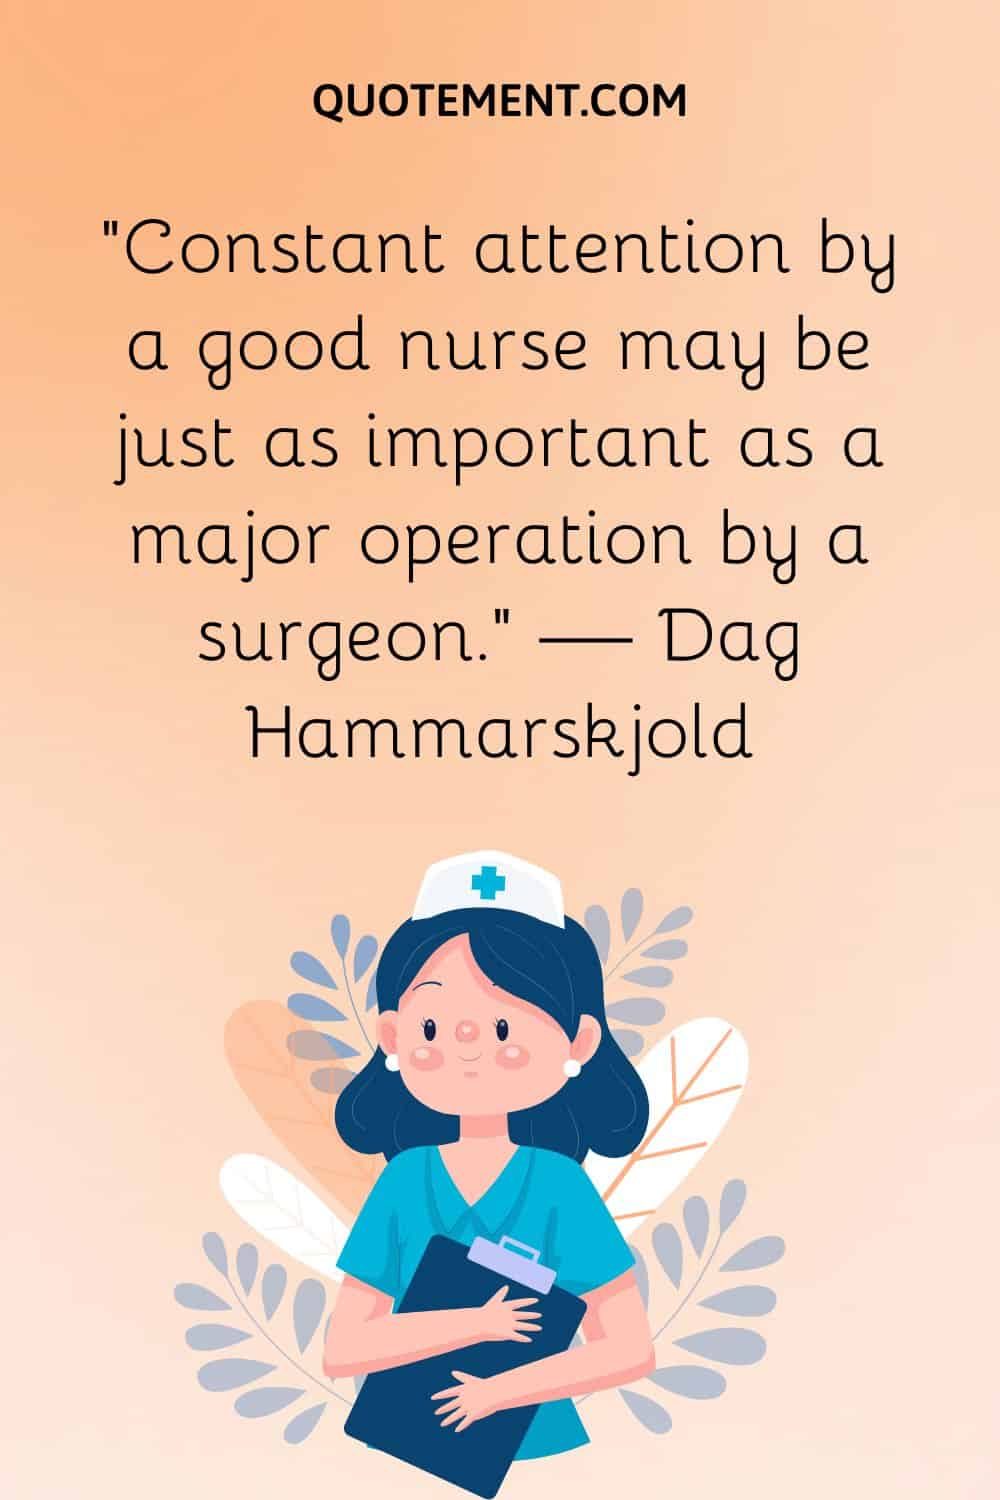 “Constant attention by a good nurse may be just as important as a major operation by a surgeon.” — Dag Hammarskjold